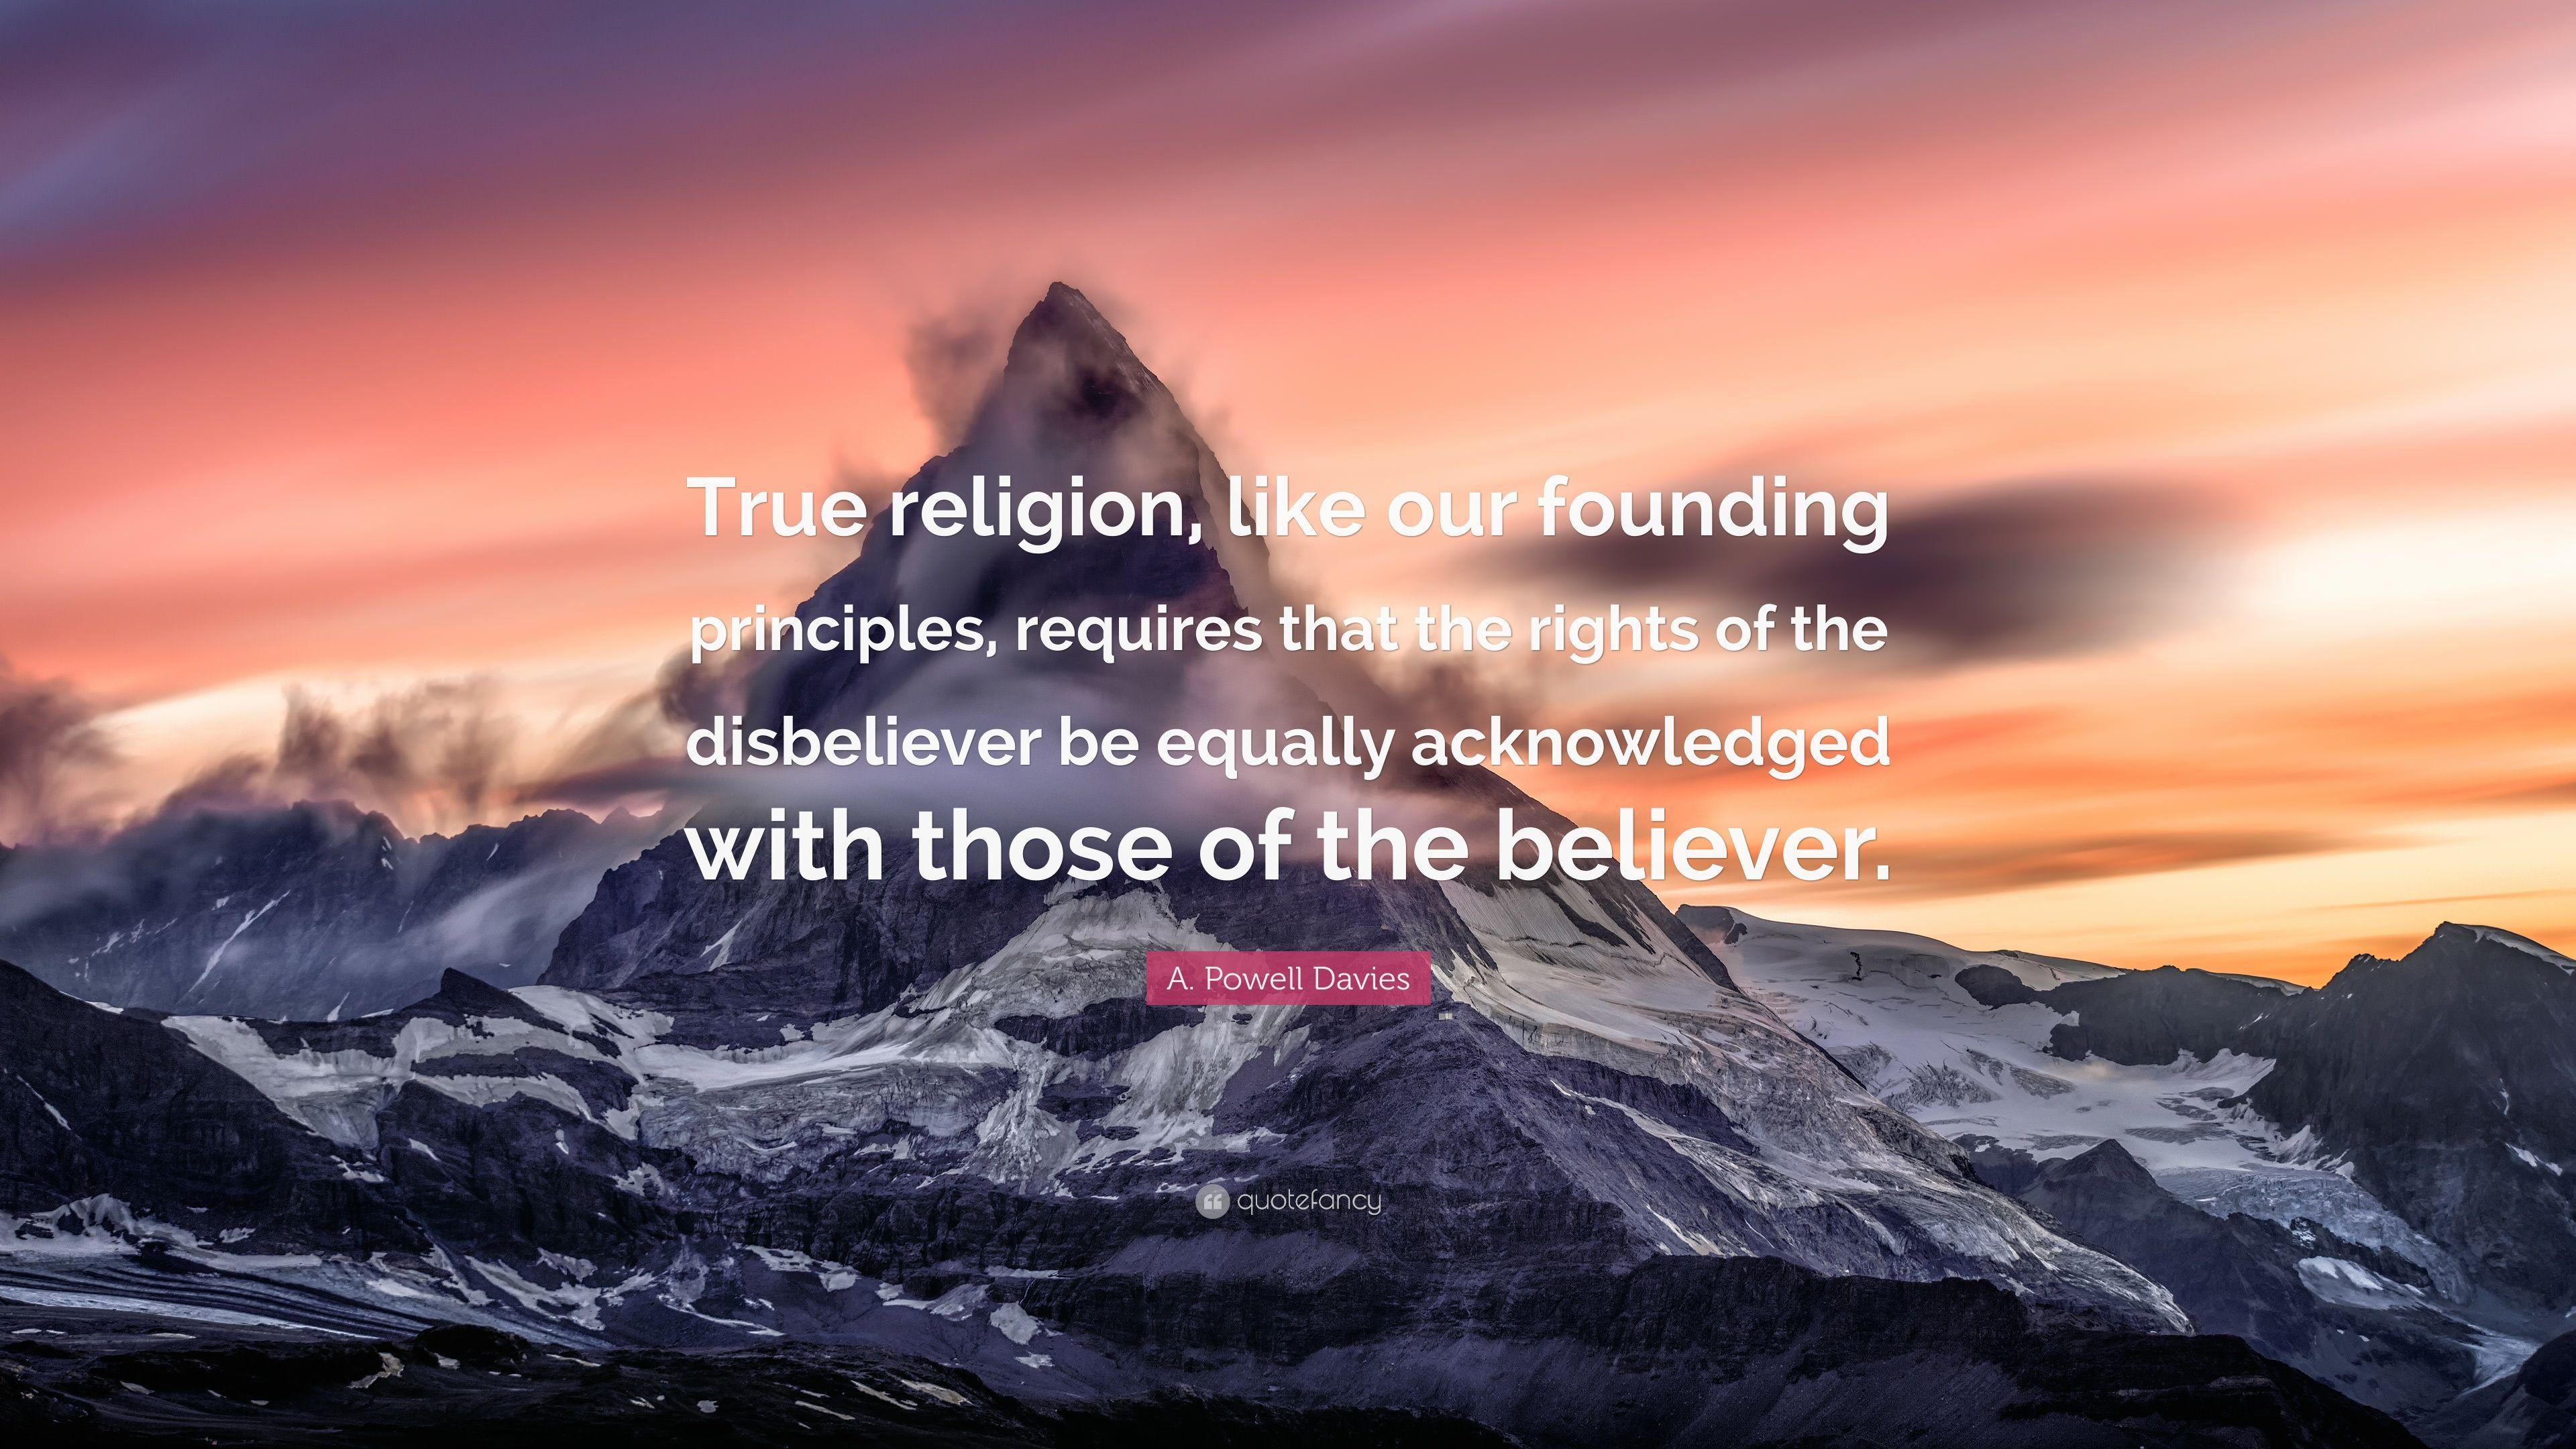 A. Powell Davies Quote: “True religion, like our founding